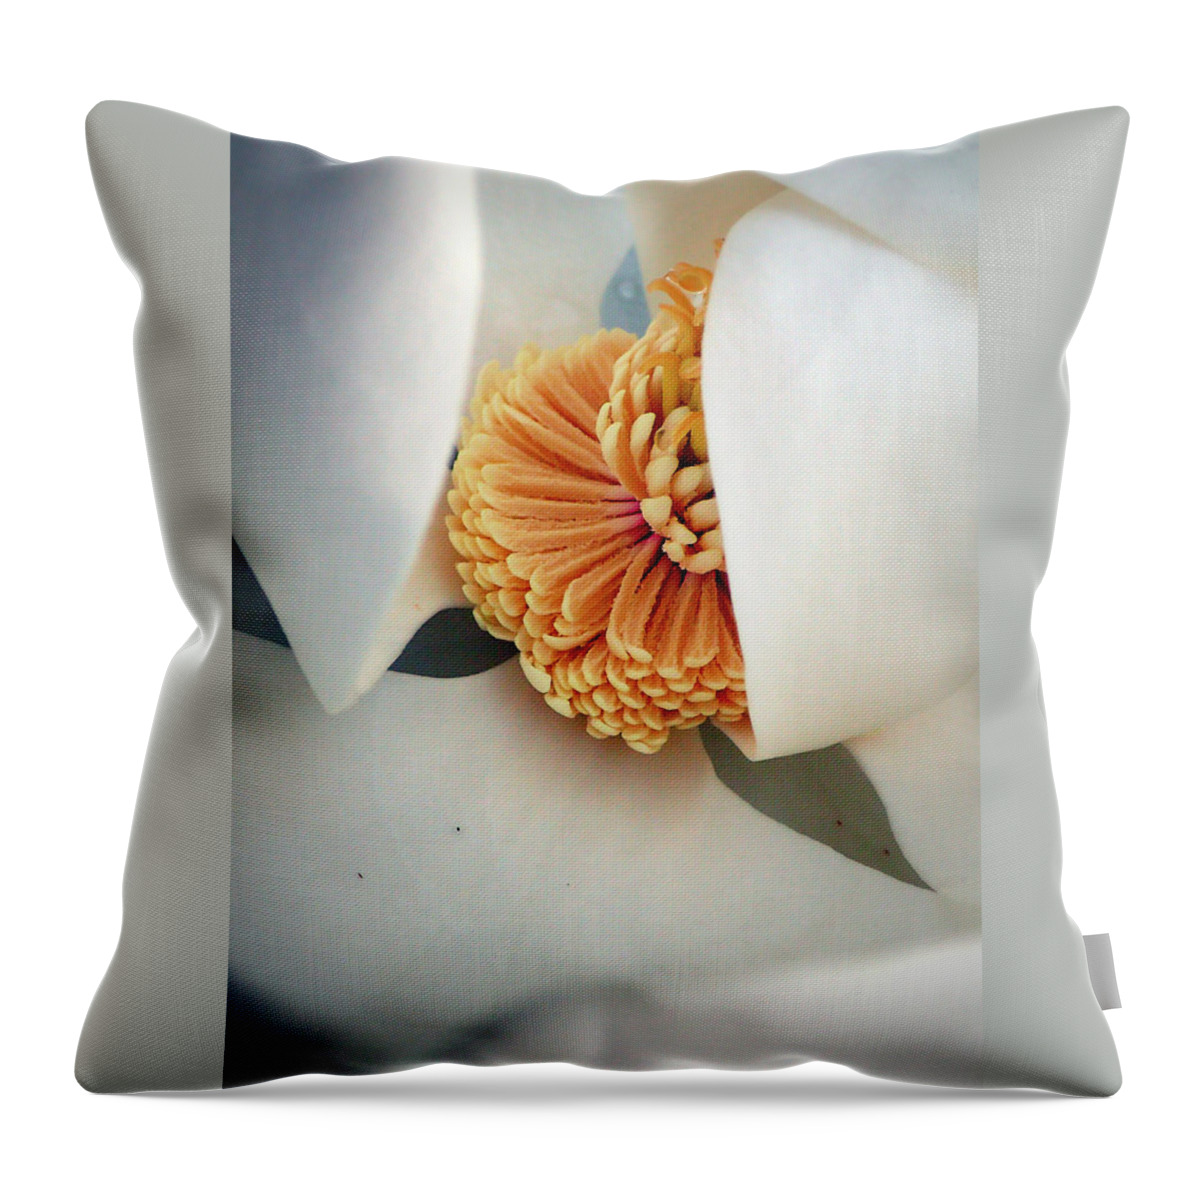 Magnolia Throw Pillow featuring the photograph Magnolia Blossom by Farol Tomson